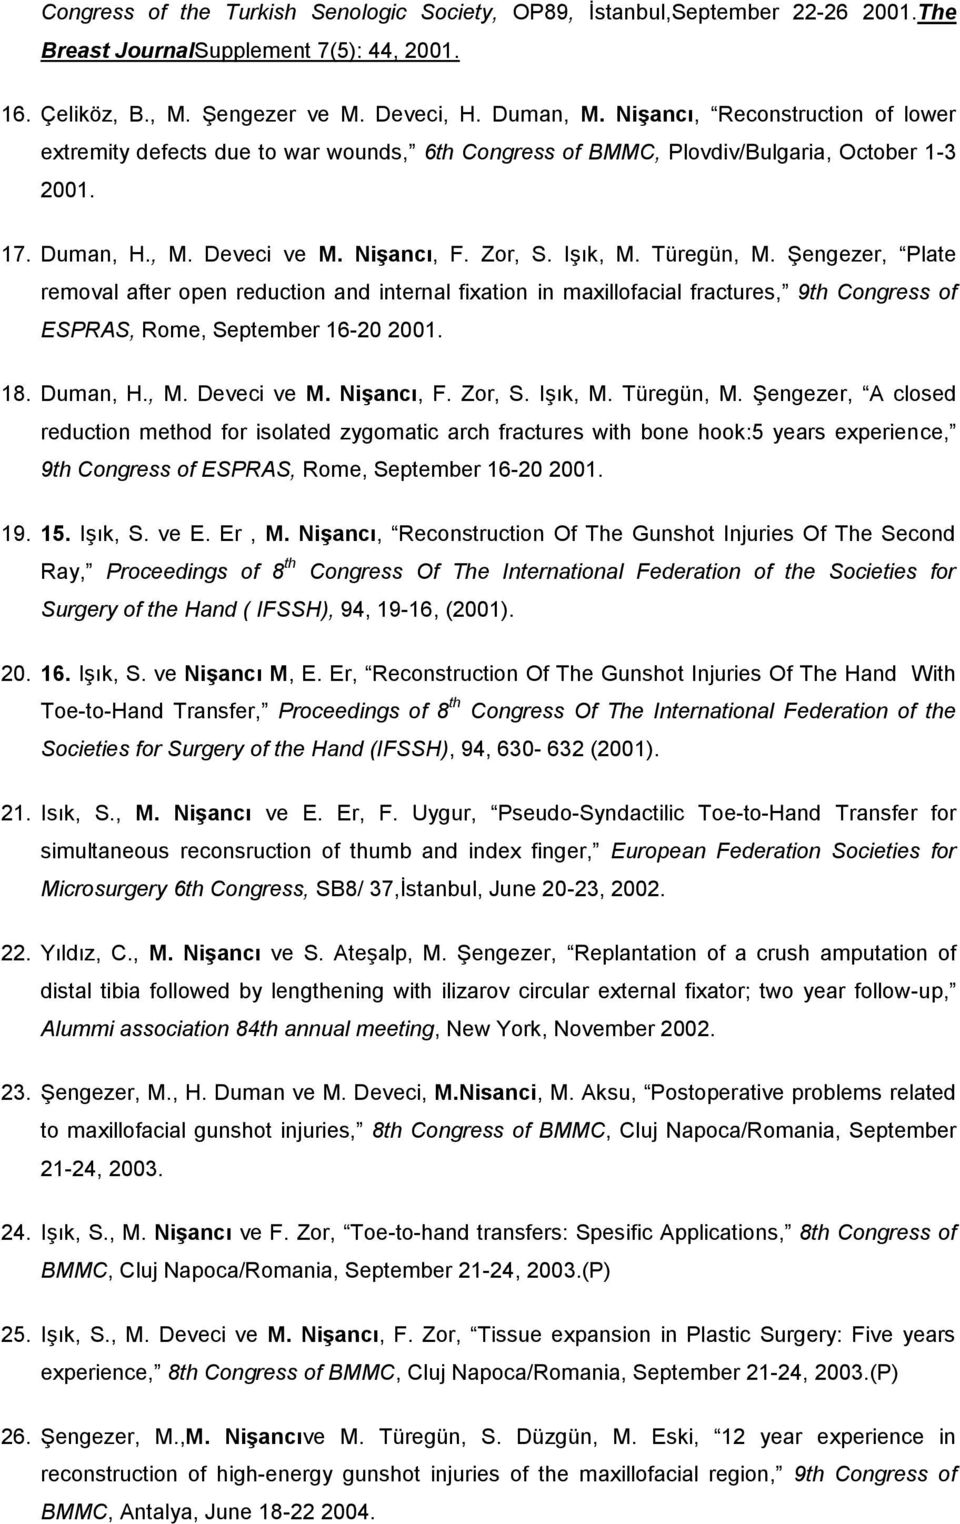 Şengezer, Plate removal after open reduction and internal fixation in maxillofacial fractures, 9th Congress of ESPRAS, Rome, September 16-20 2001. 18. Duman, H., M. Deveci ve M. Nişancı, F. Zor, S.